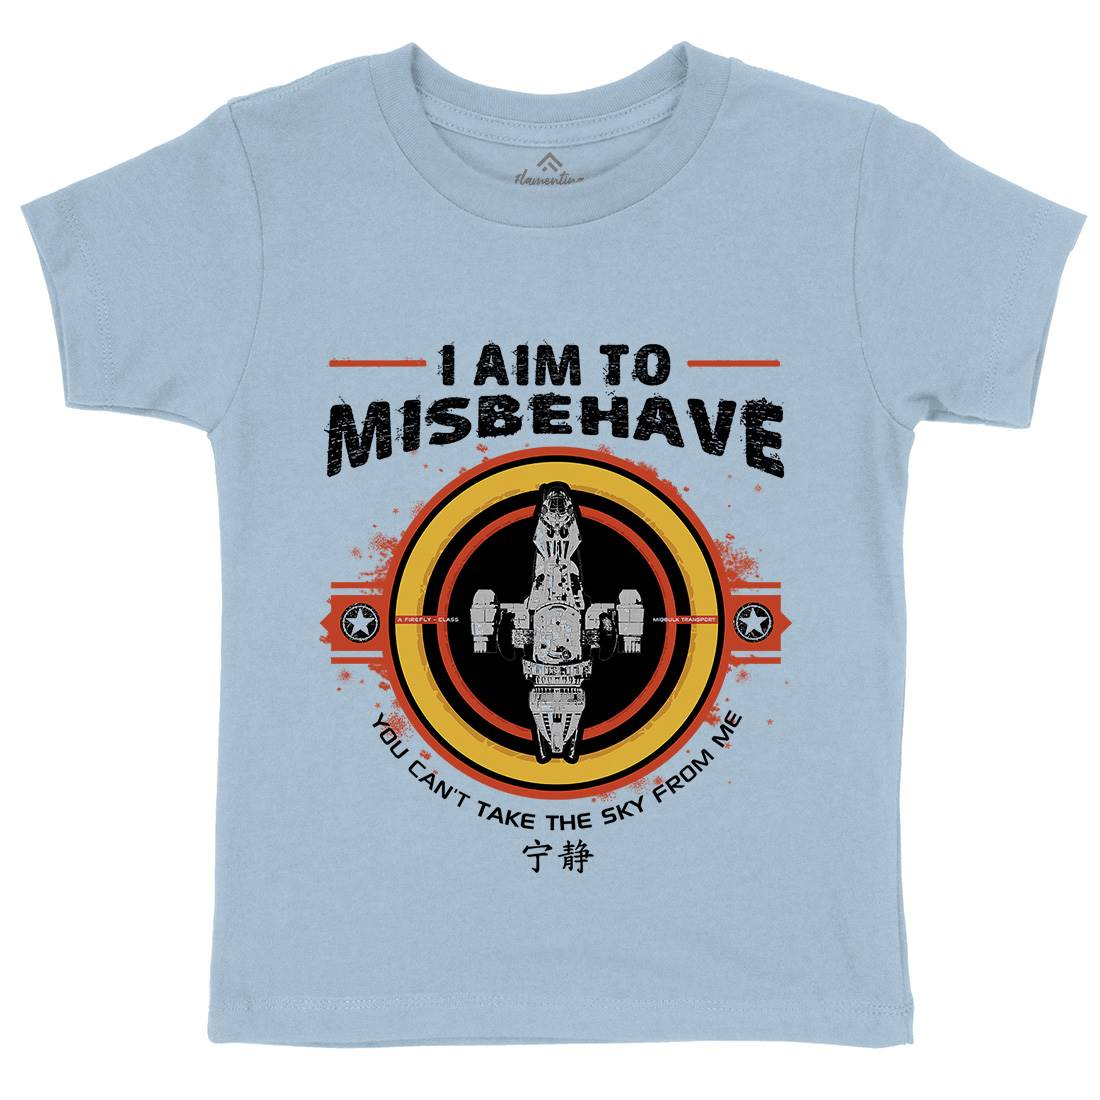 I Aim To Misbehave Kids Crew Neck T-Shirt Space D352